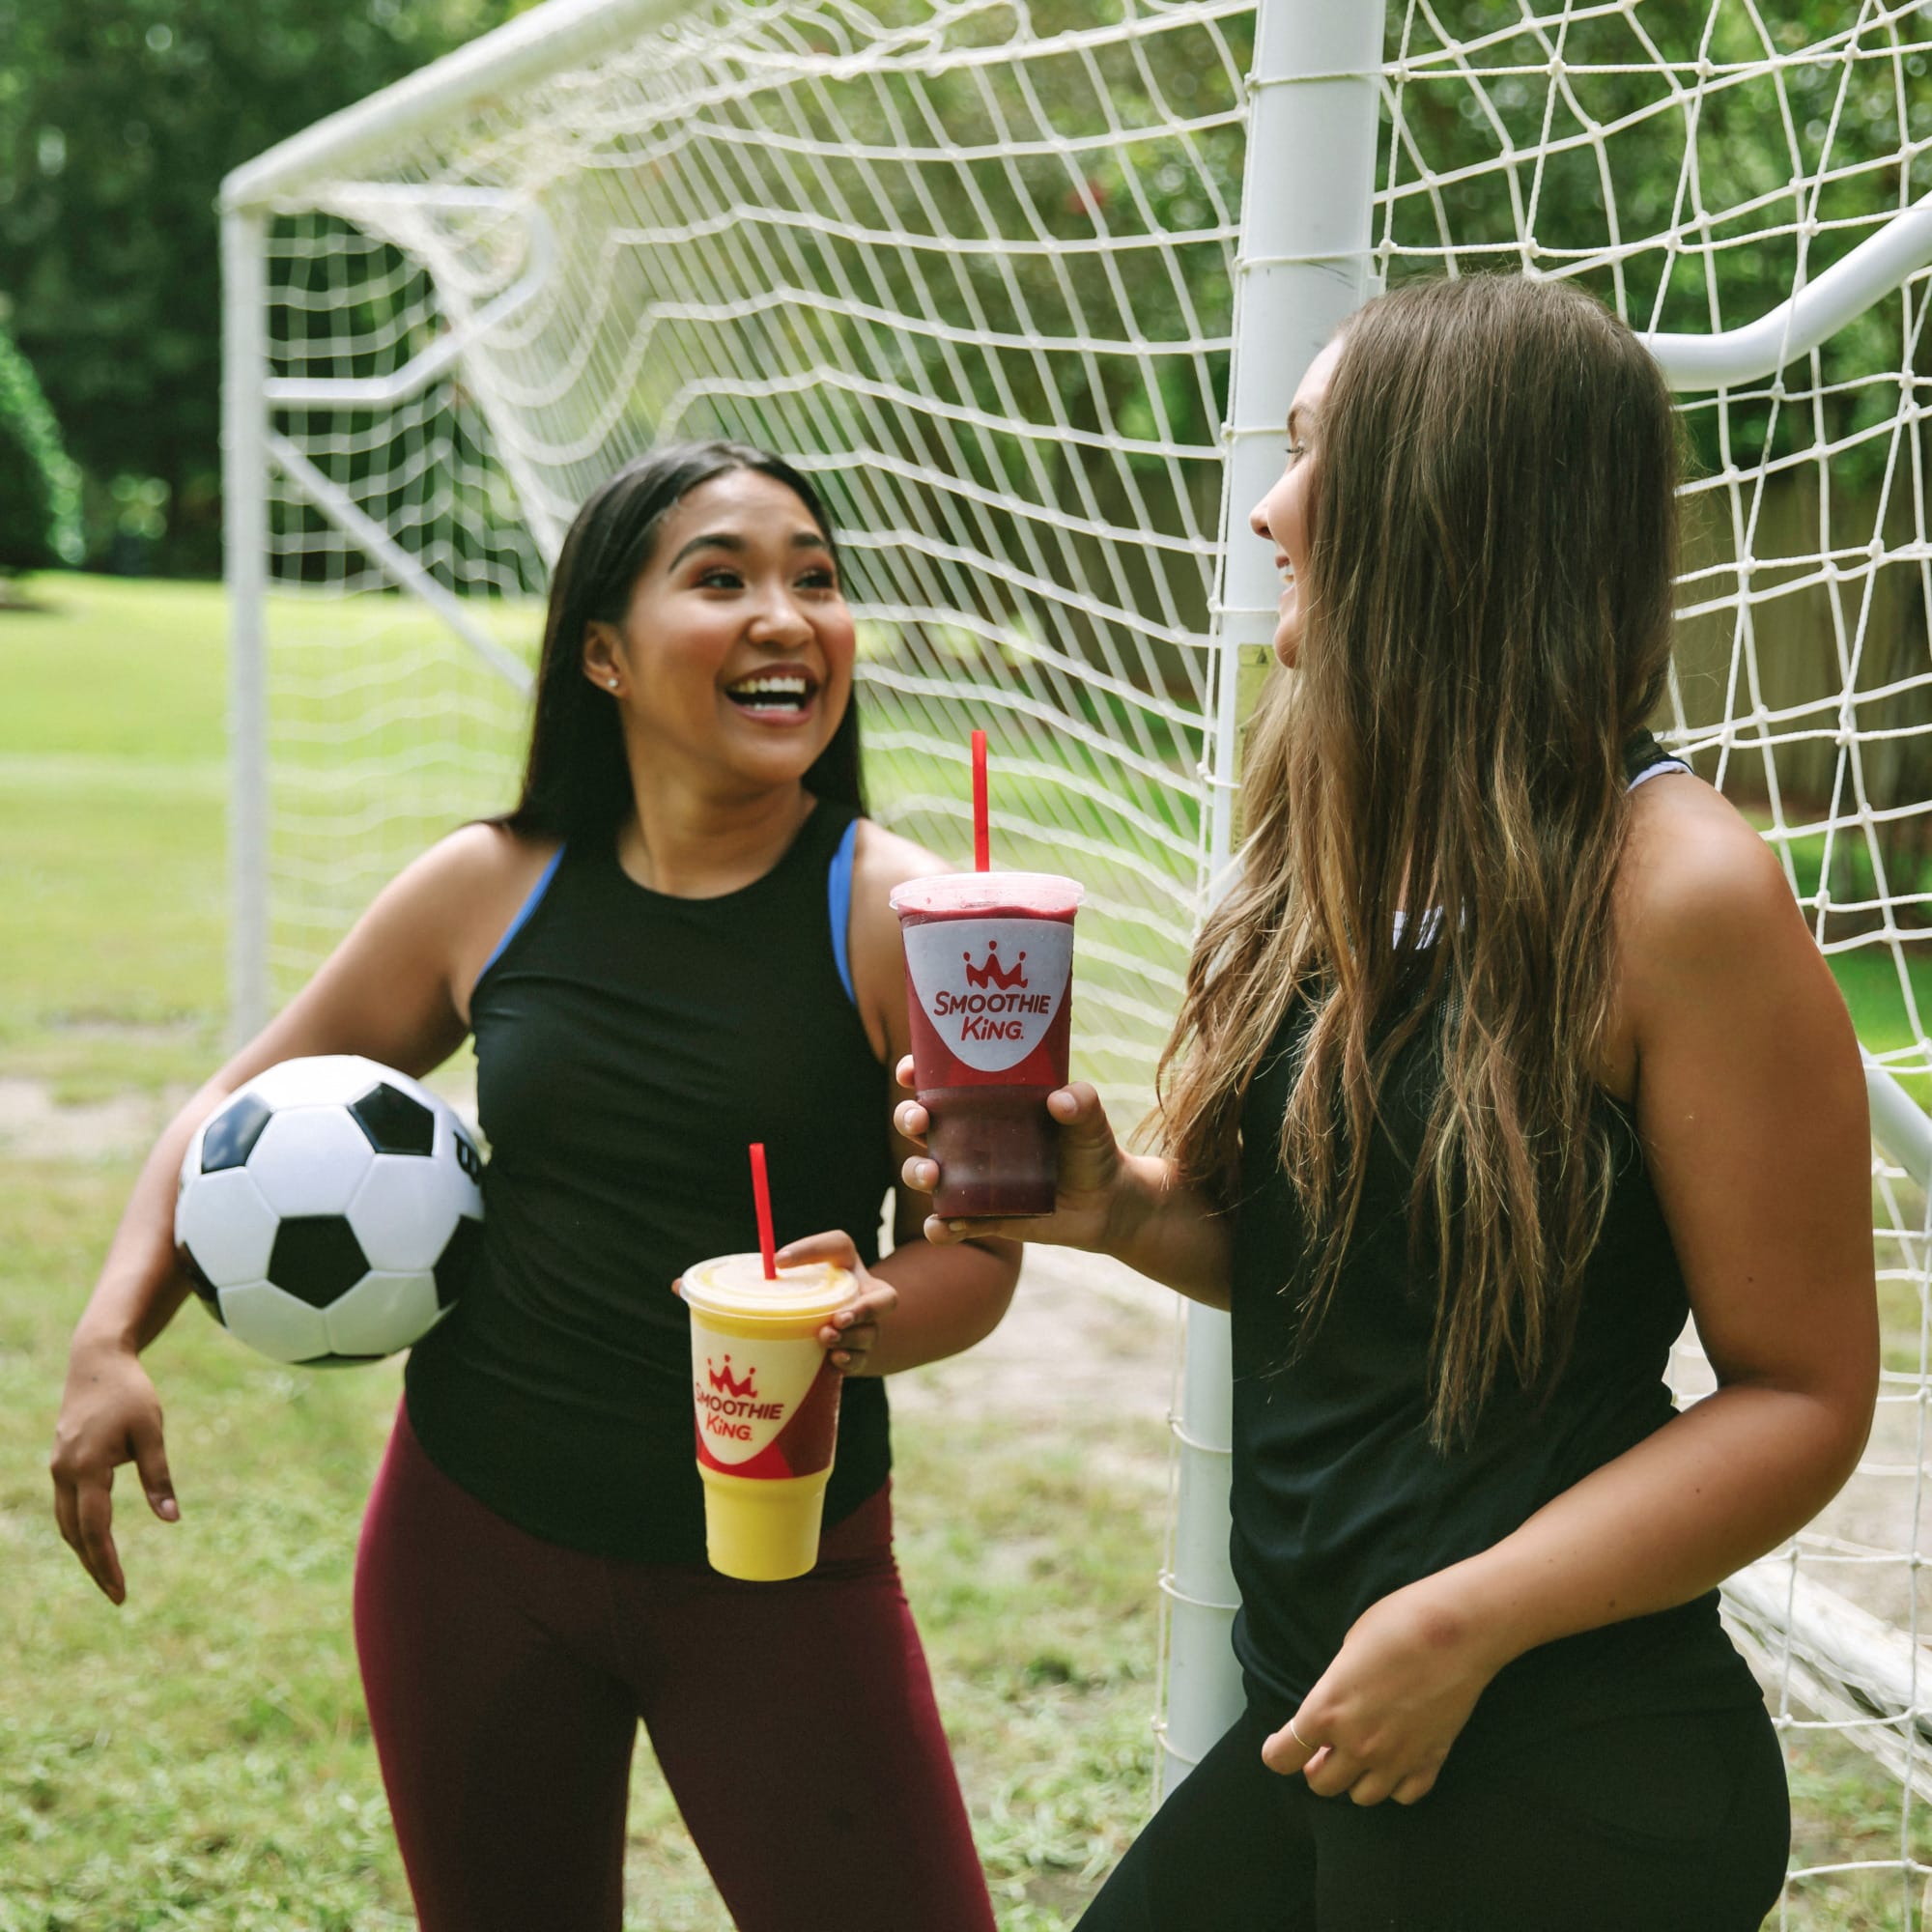 SMOOTHIE KING SOCCER